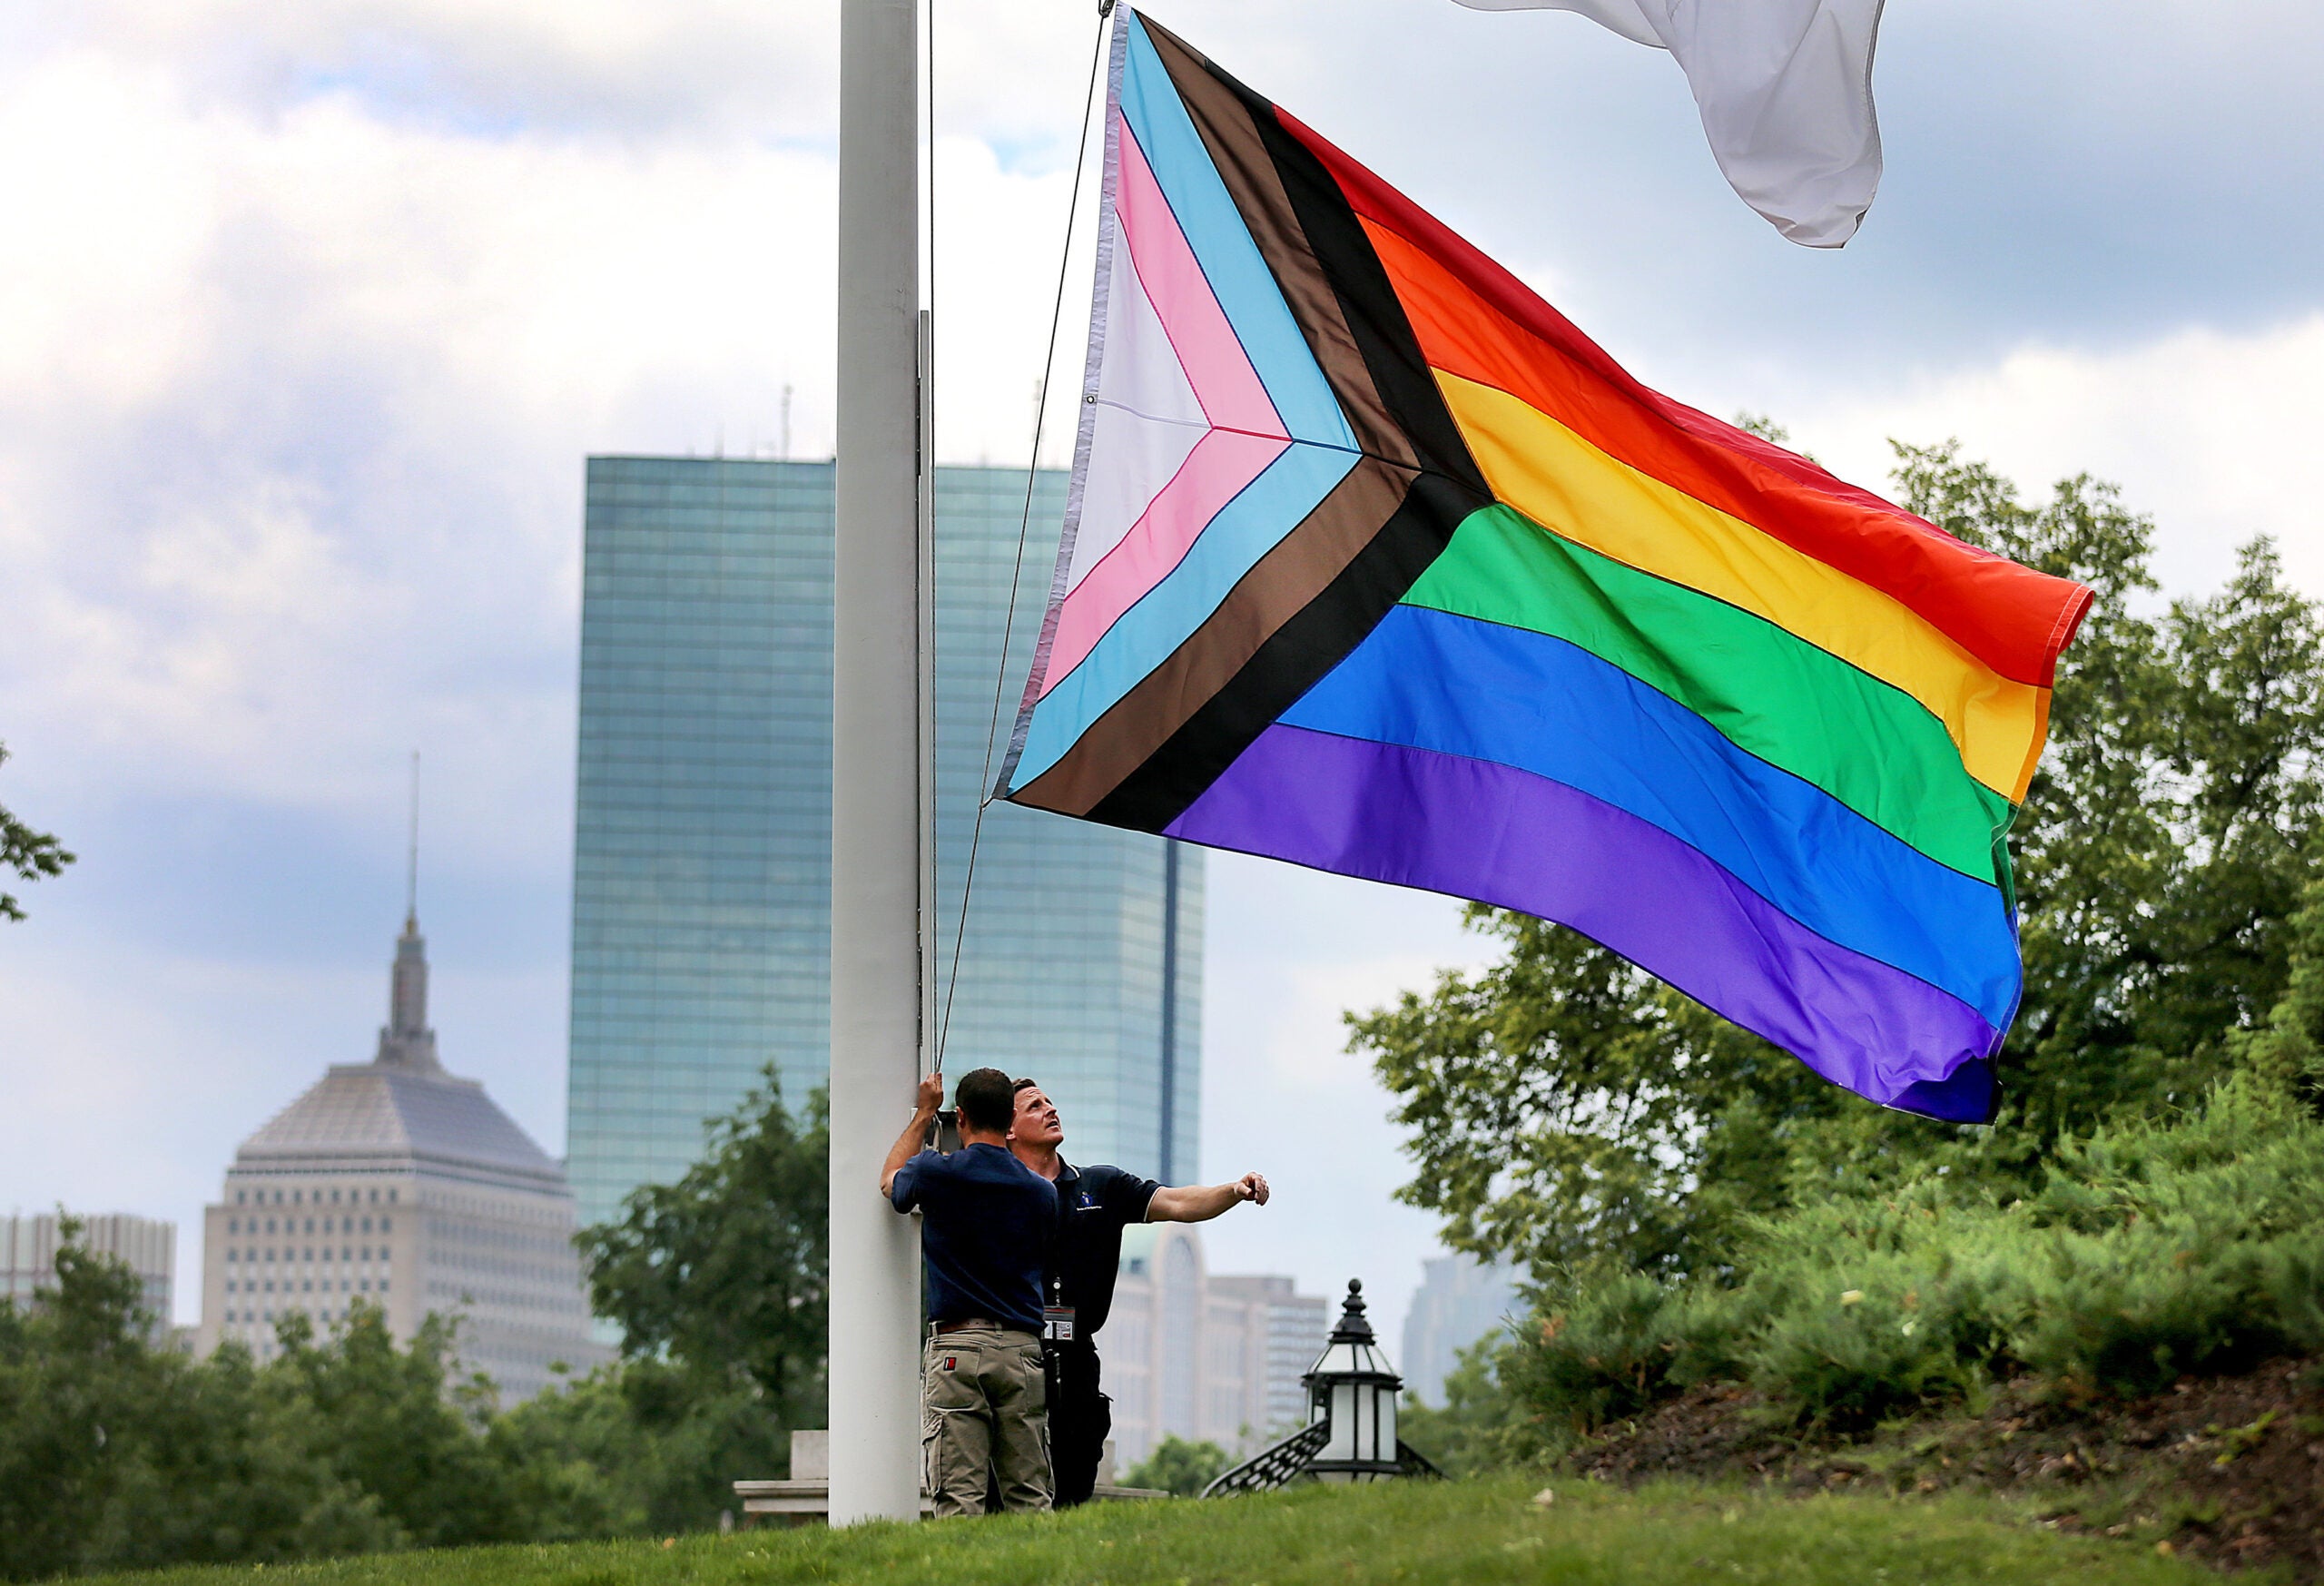 Massachusetts State House workers get set to raise the Pride flag in front of the State House on Wednesday.